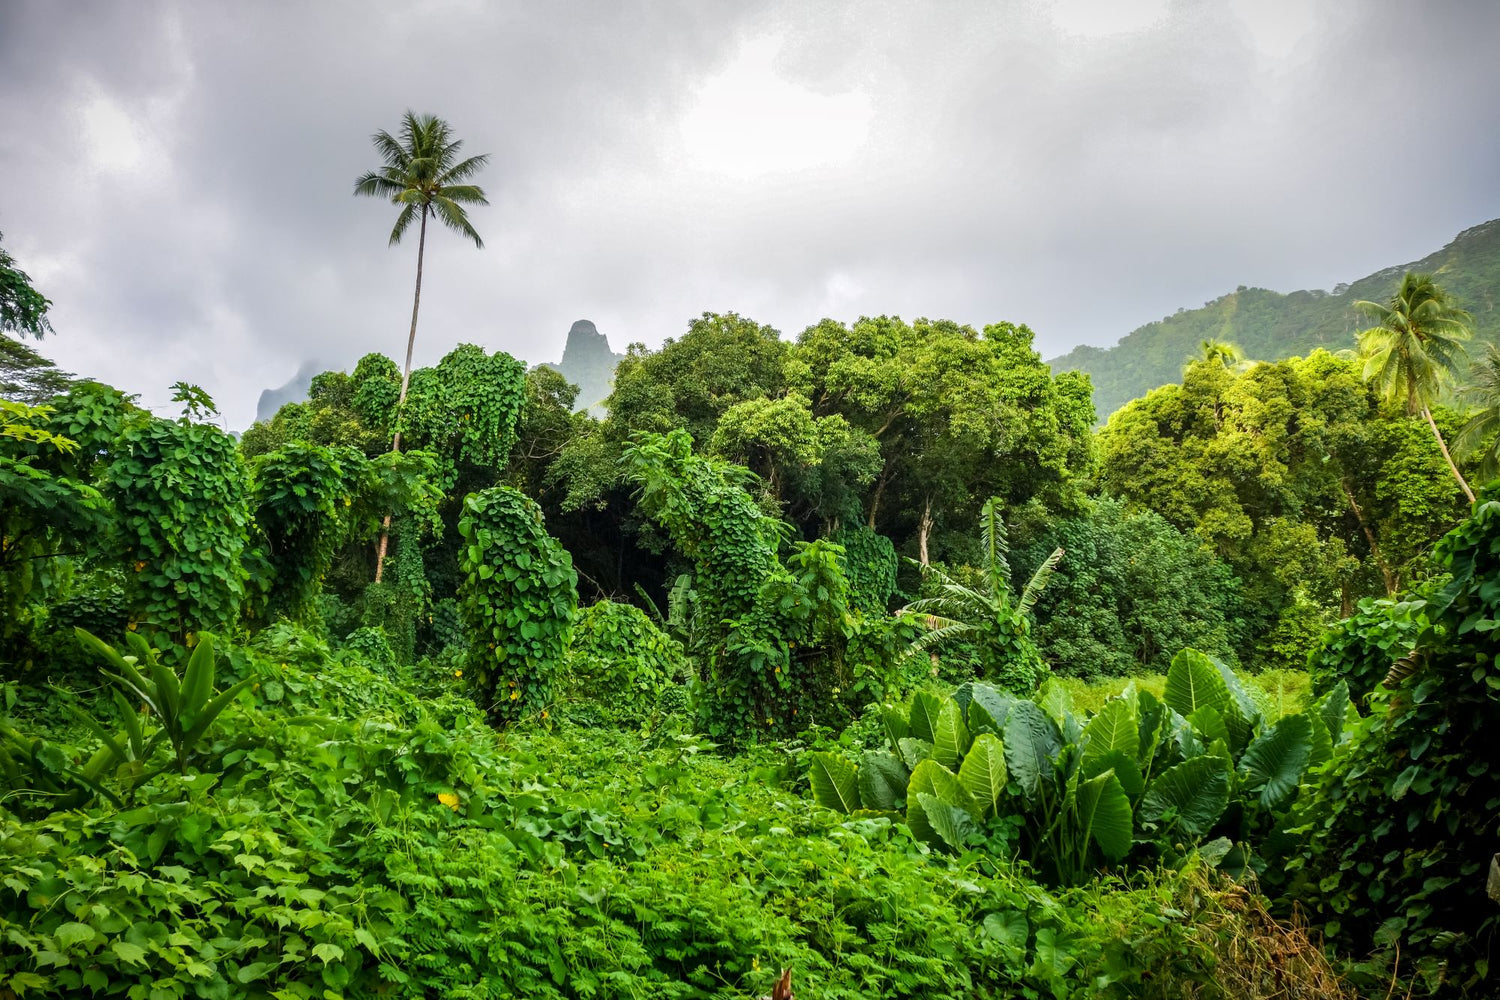 A tropical rainforest jungle landscape with grey and dark blue skies, indicating an approaching storm. The wind is blowing, causing a mist to form and increasing the humidity in the air. The jungle is lush with layered tropical plants, including pothos, growing on top of each other. The dense foliage creates a layered effect with groundcover, vines and trees visible.